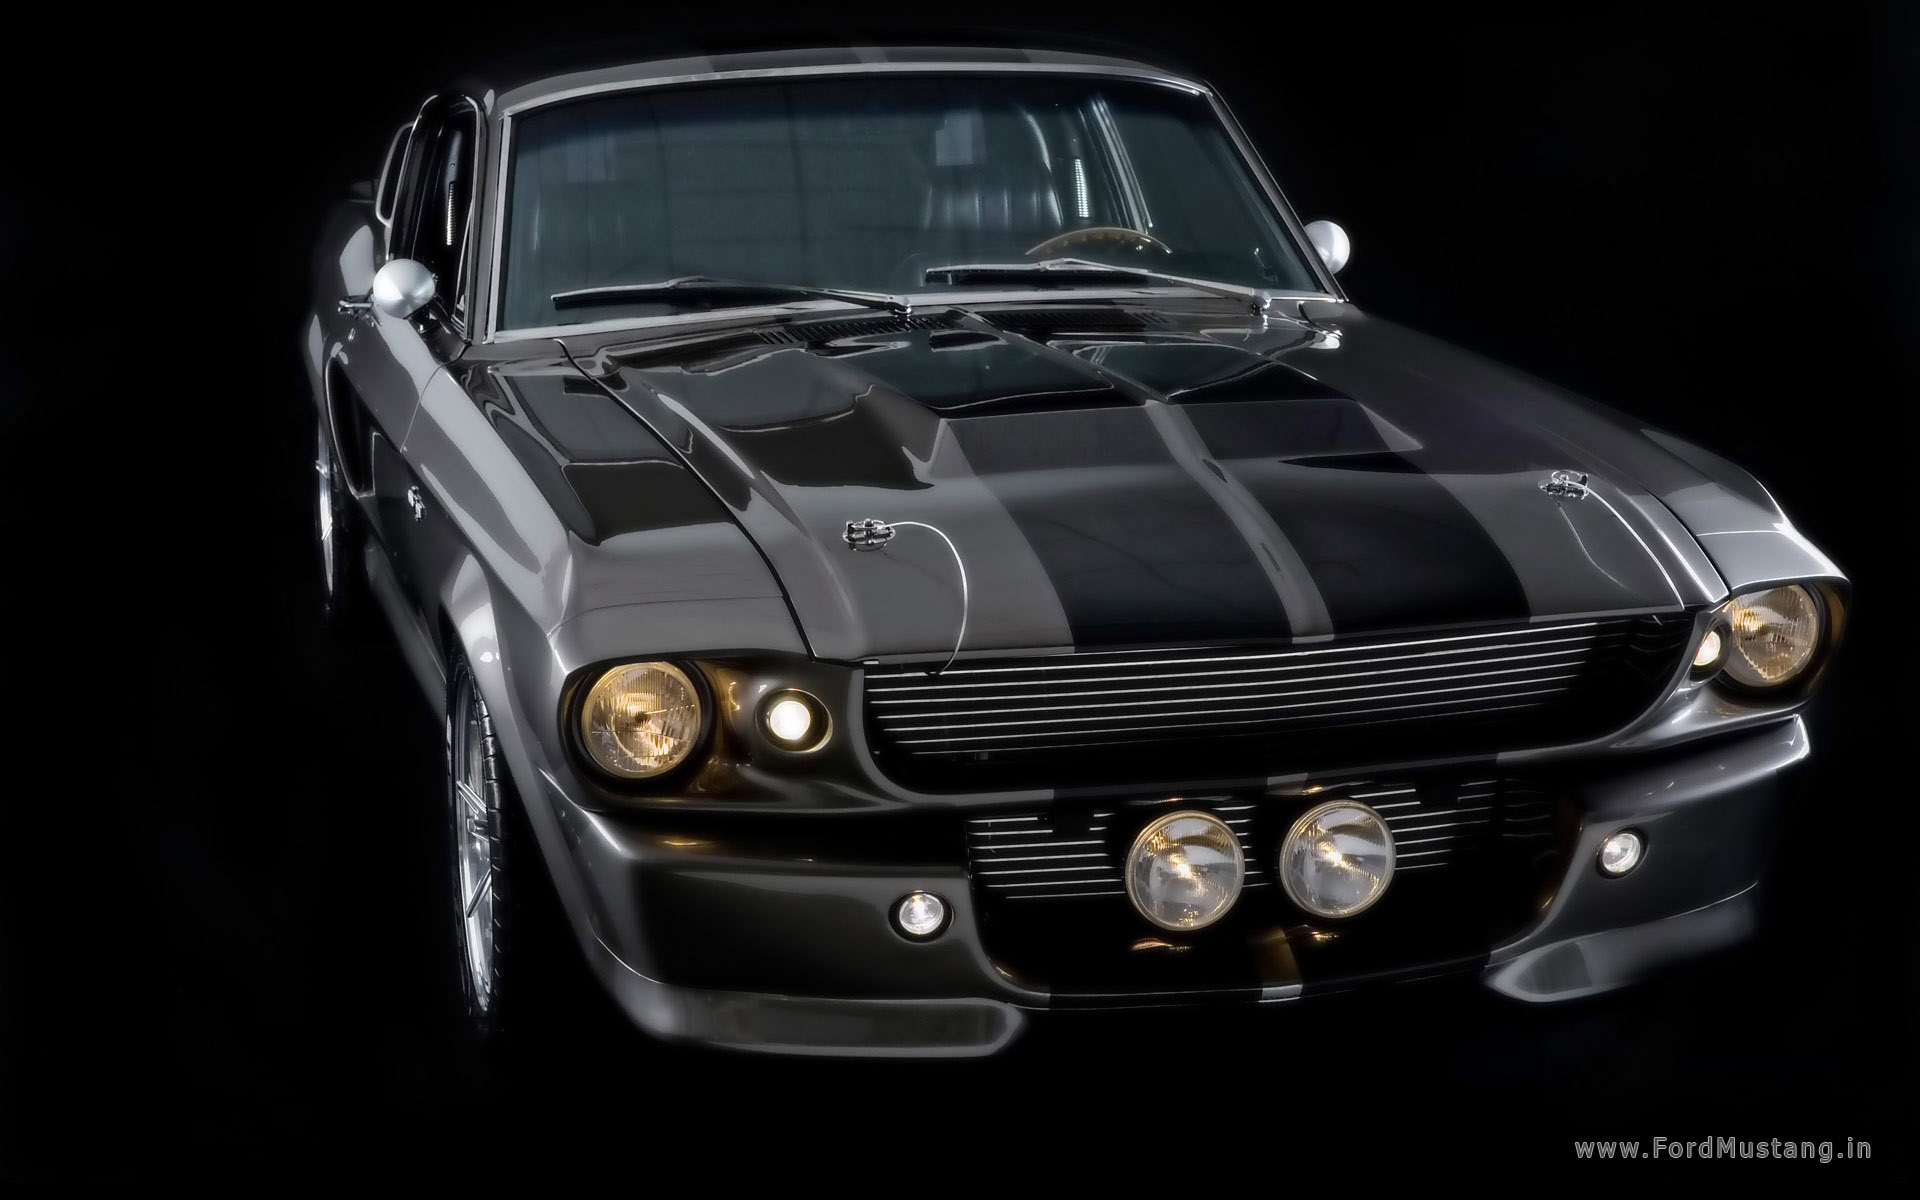 Ford Mustang Shelby Gt500 Eleanor Gone In Seconds Wallpaper